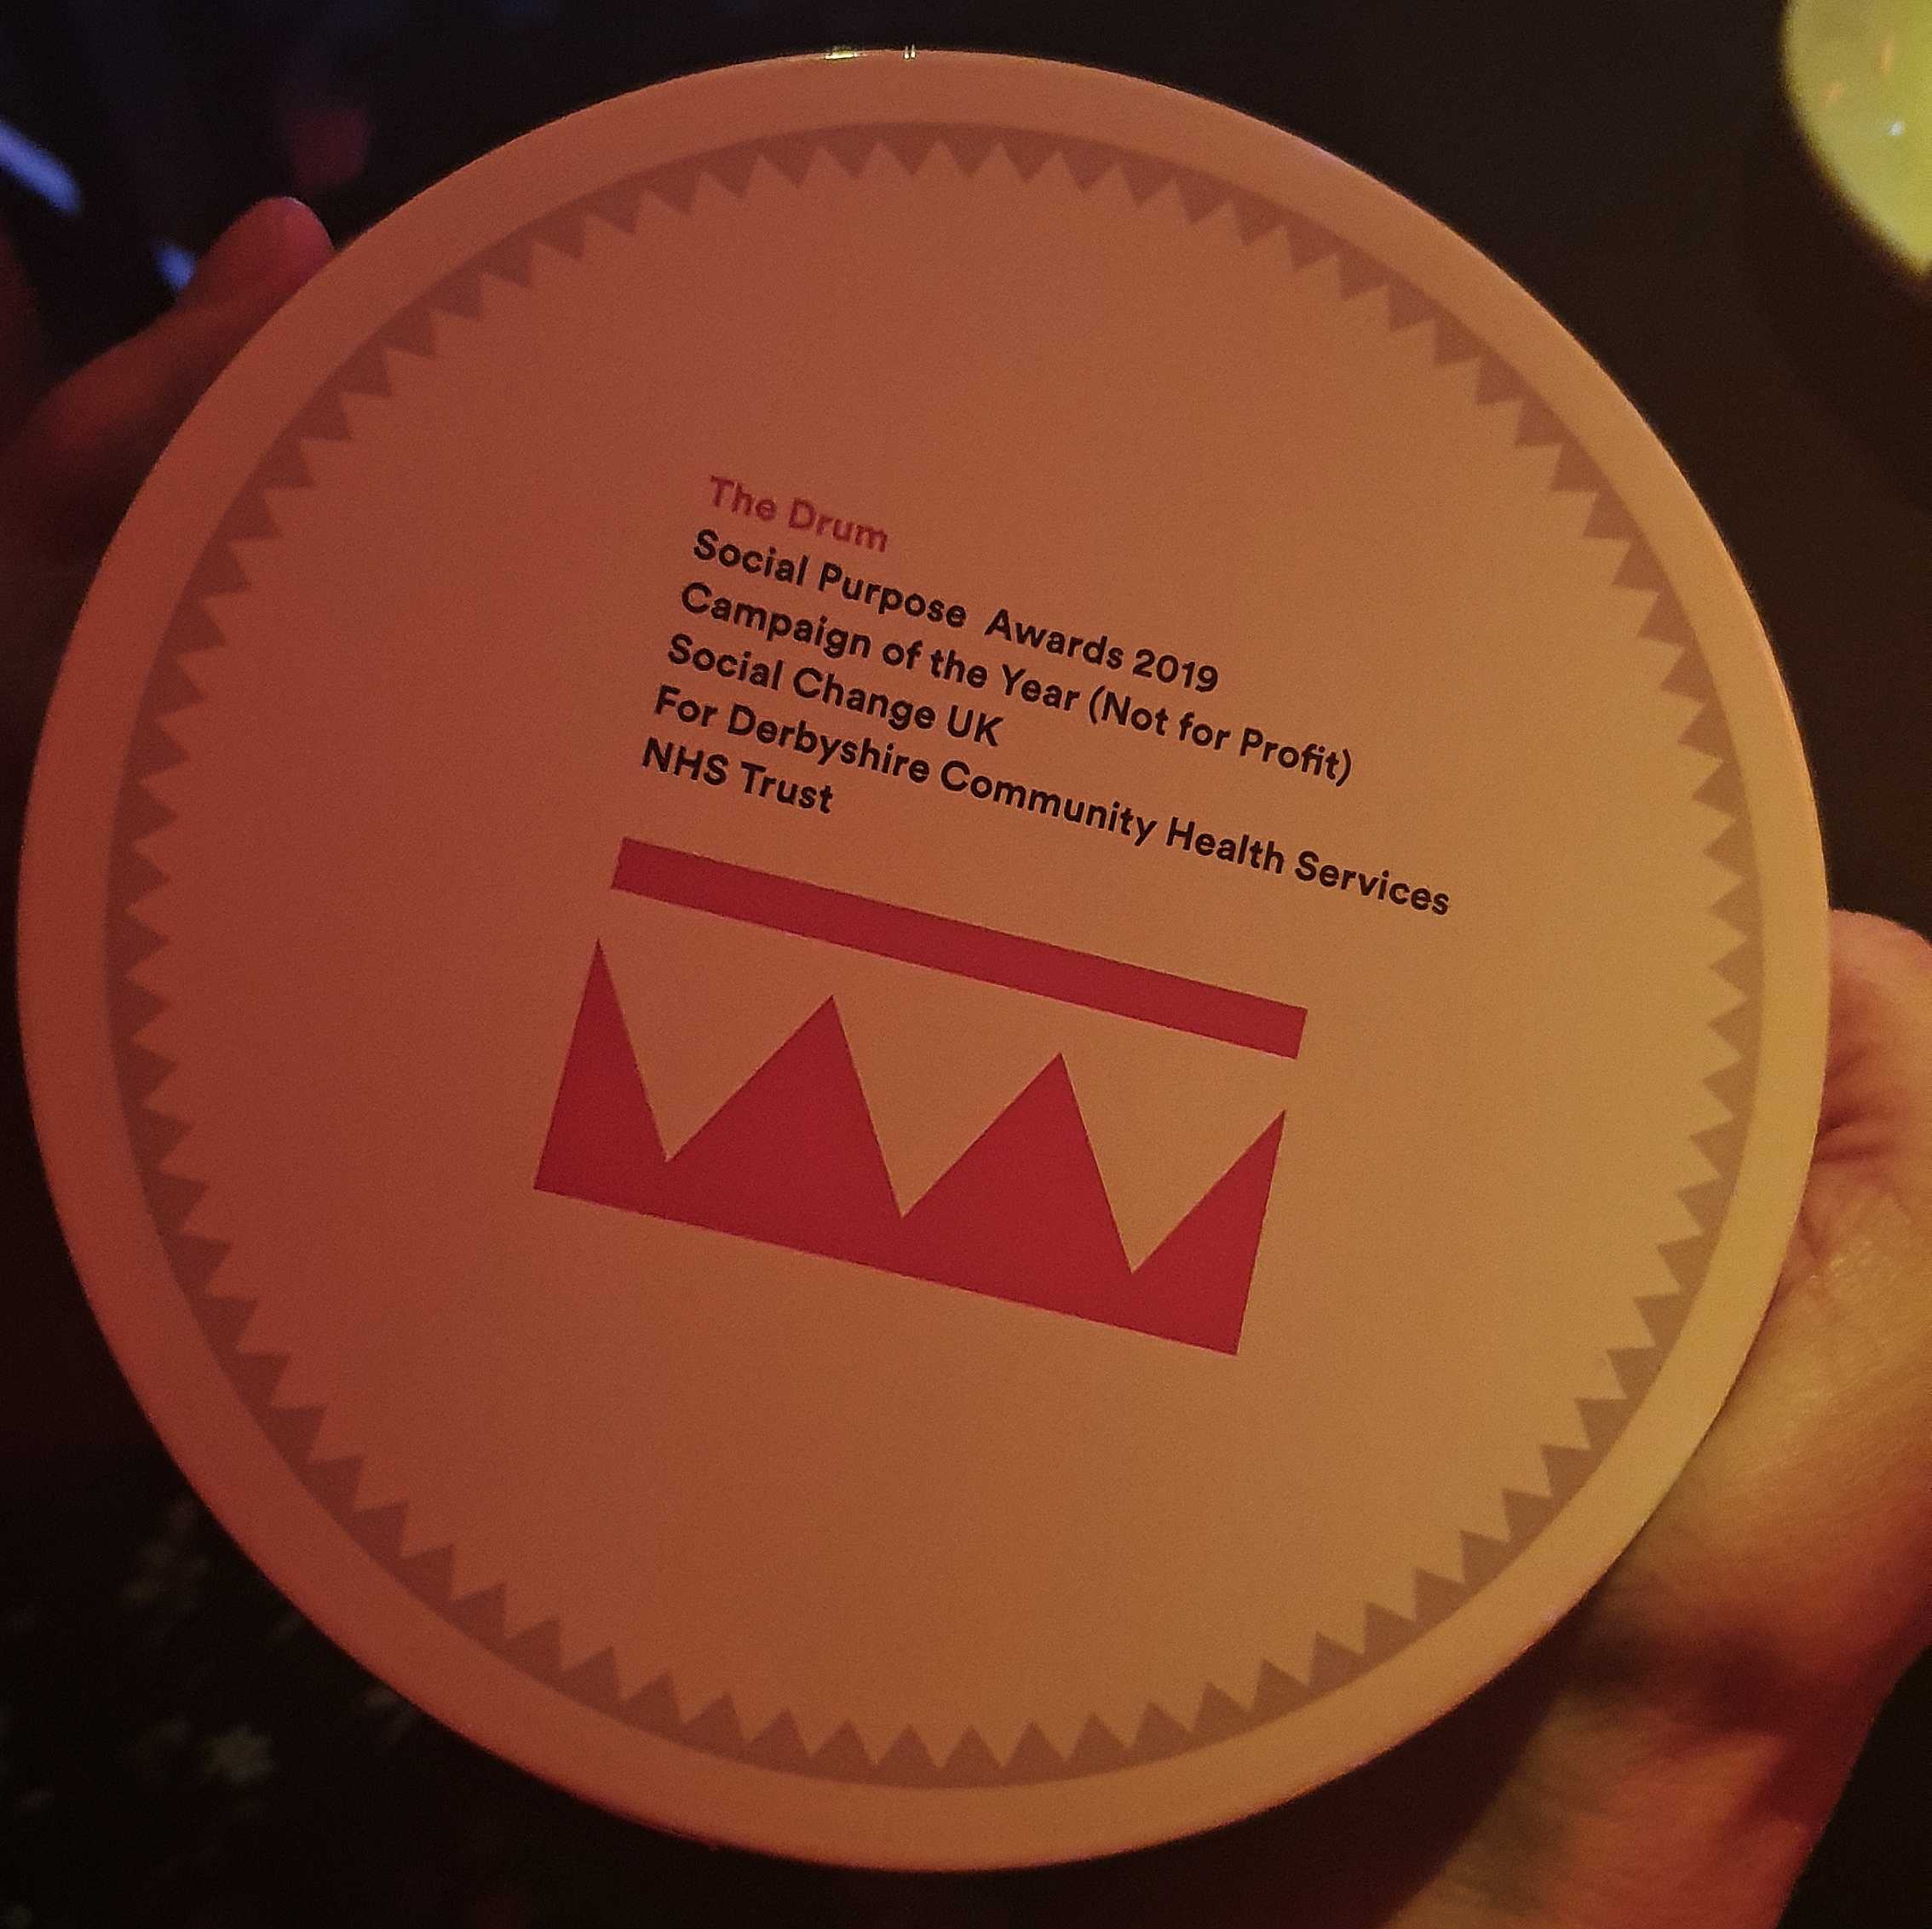 A close-up shot of Social Change UK's Social Purpose award from The Drum.